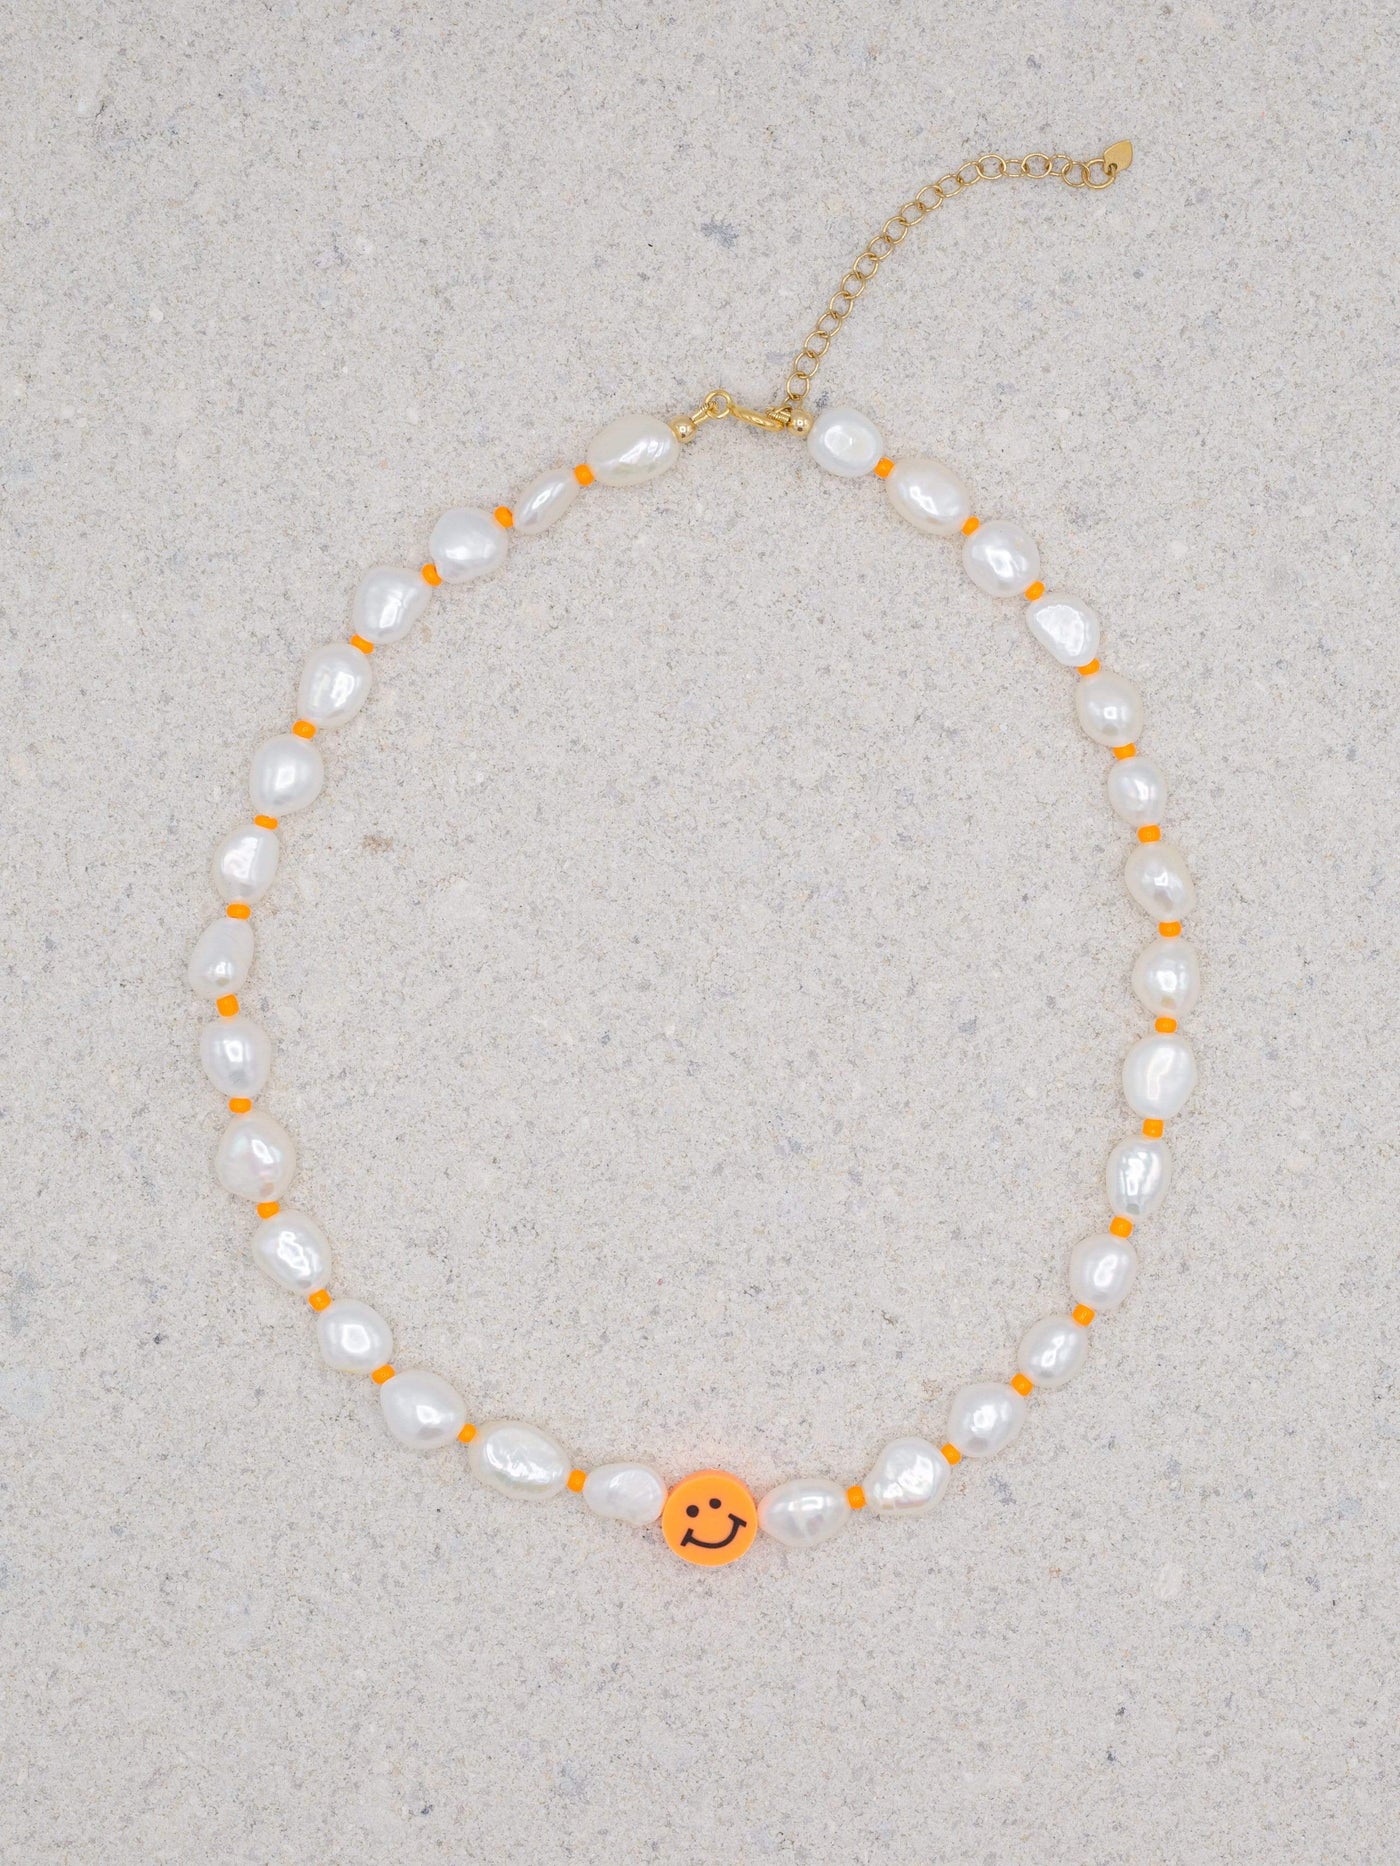 Smiley Face Necklace Trending Jewelry In 925 Sterling Most Selling at Rs  999/piece | Vidhyadhar Nagar | Jaipur | ID: 2852623450530